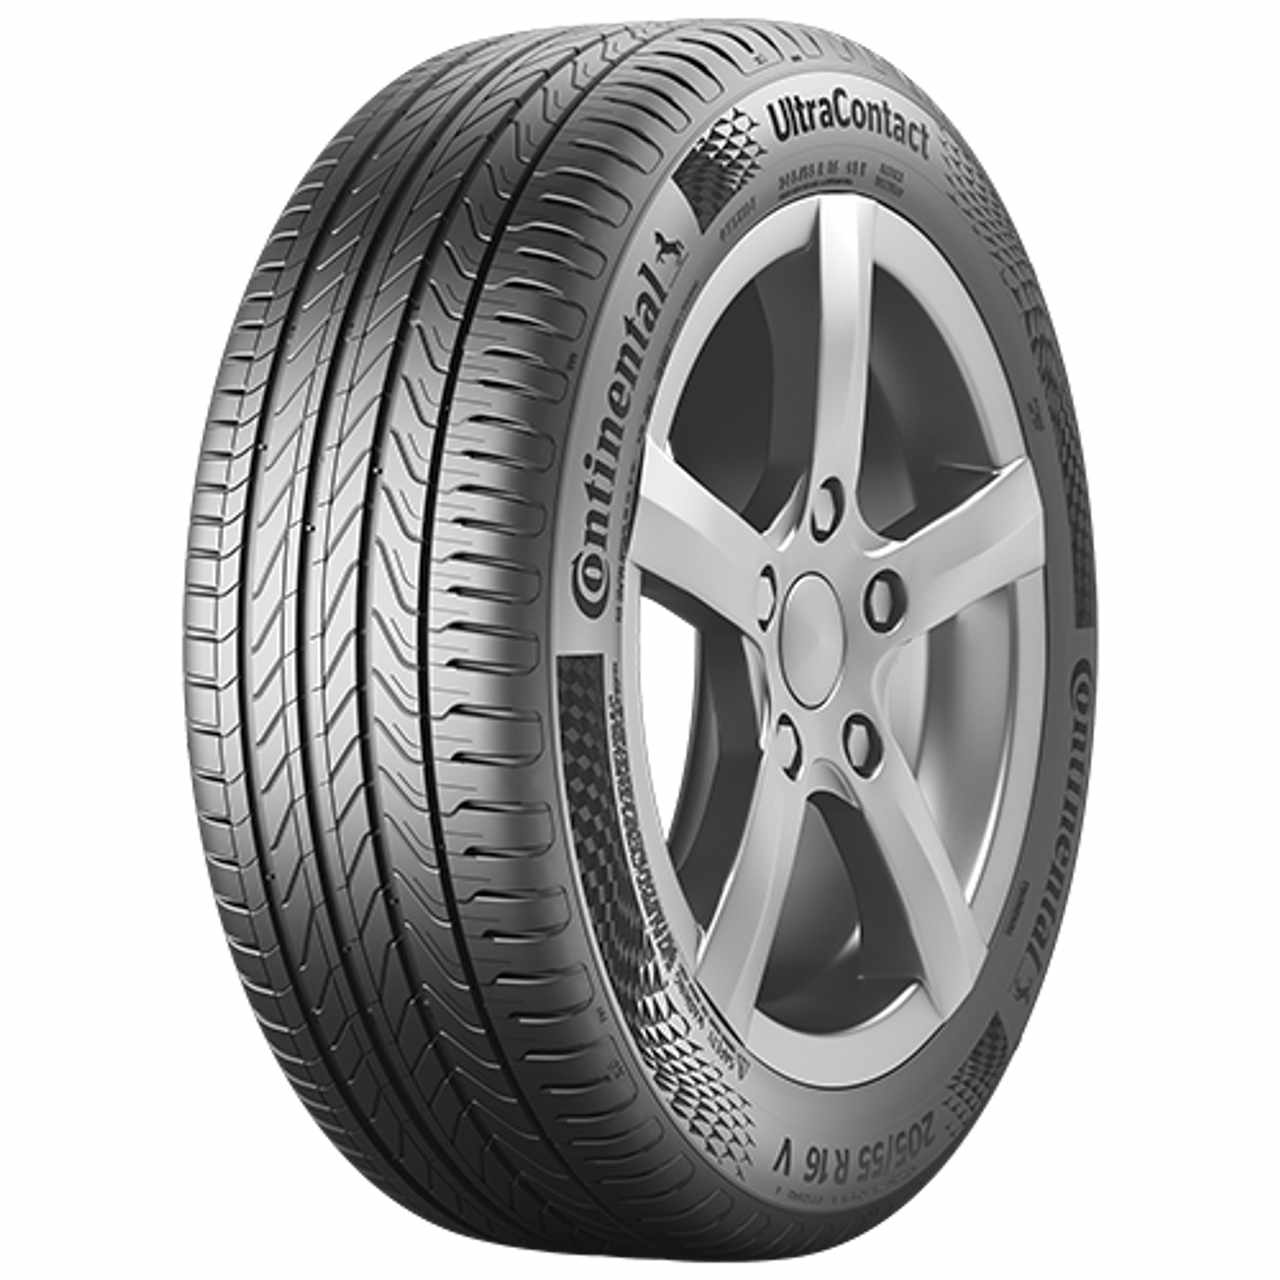 CONTINENTAL ULTRACONTACT (EVc) 225/45R17 91V FR BSW